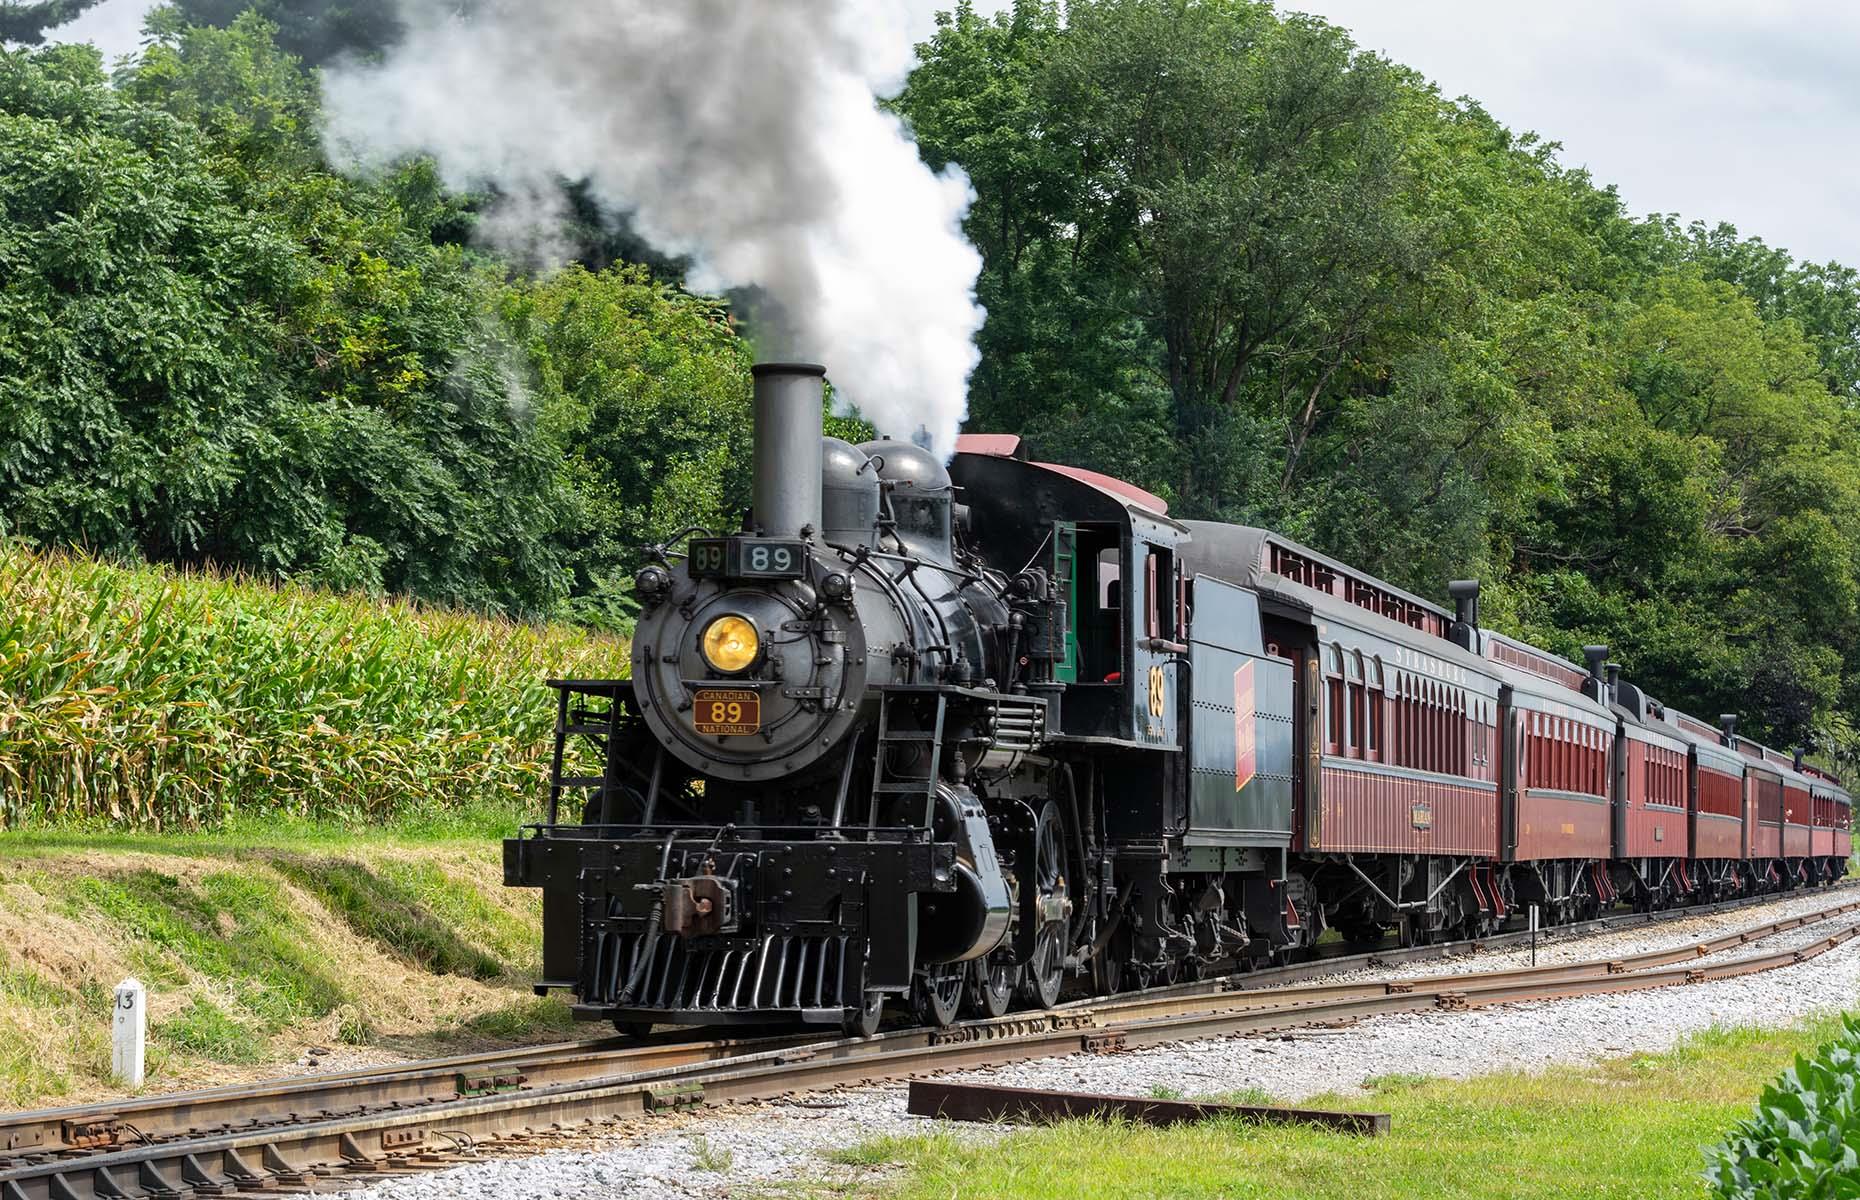 <p>America’s oldest operating railroad, the <a href="https://www.strasburgrailroad.com/">Strasburg Rail Road</a> first puffed off the buffers in 1832. Today it takes its passengers on a whistle-stop tour through Pennsylvanian Amish country. Four steam locomotives still pull original rolling stock on the 45-minute round trip to and from Paradise, and an audio commentary dispenses nuggets of knowledge on the nation’s oldest continuously operating short line railway.</p>